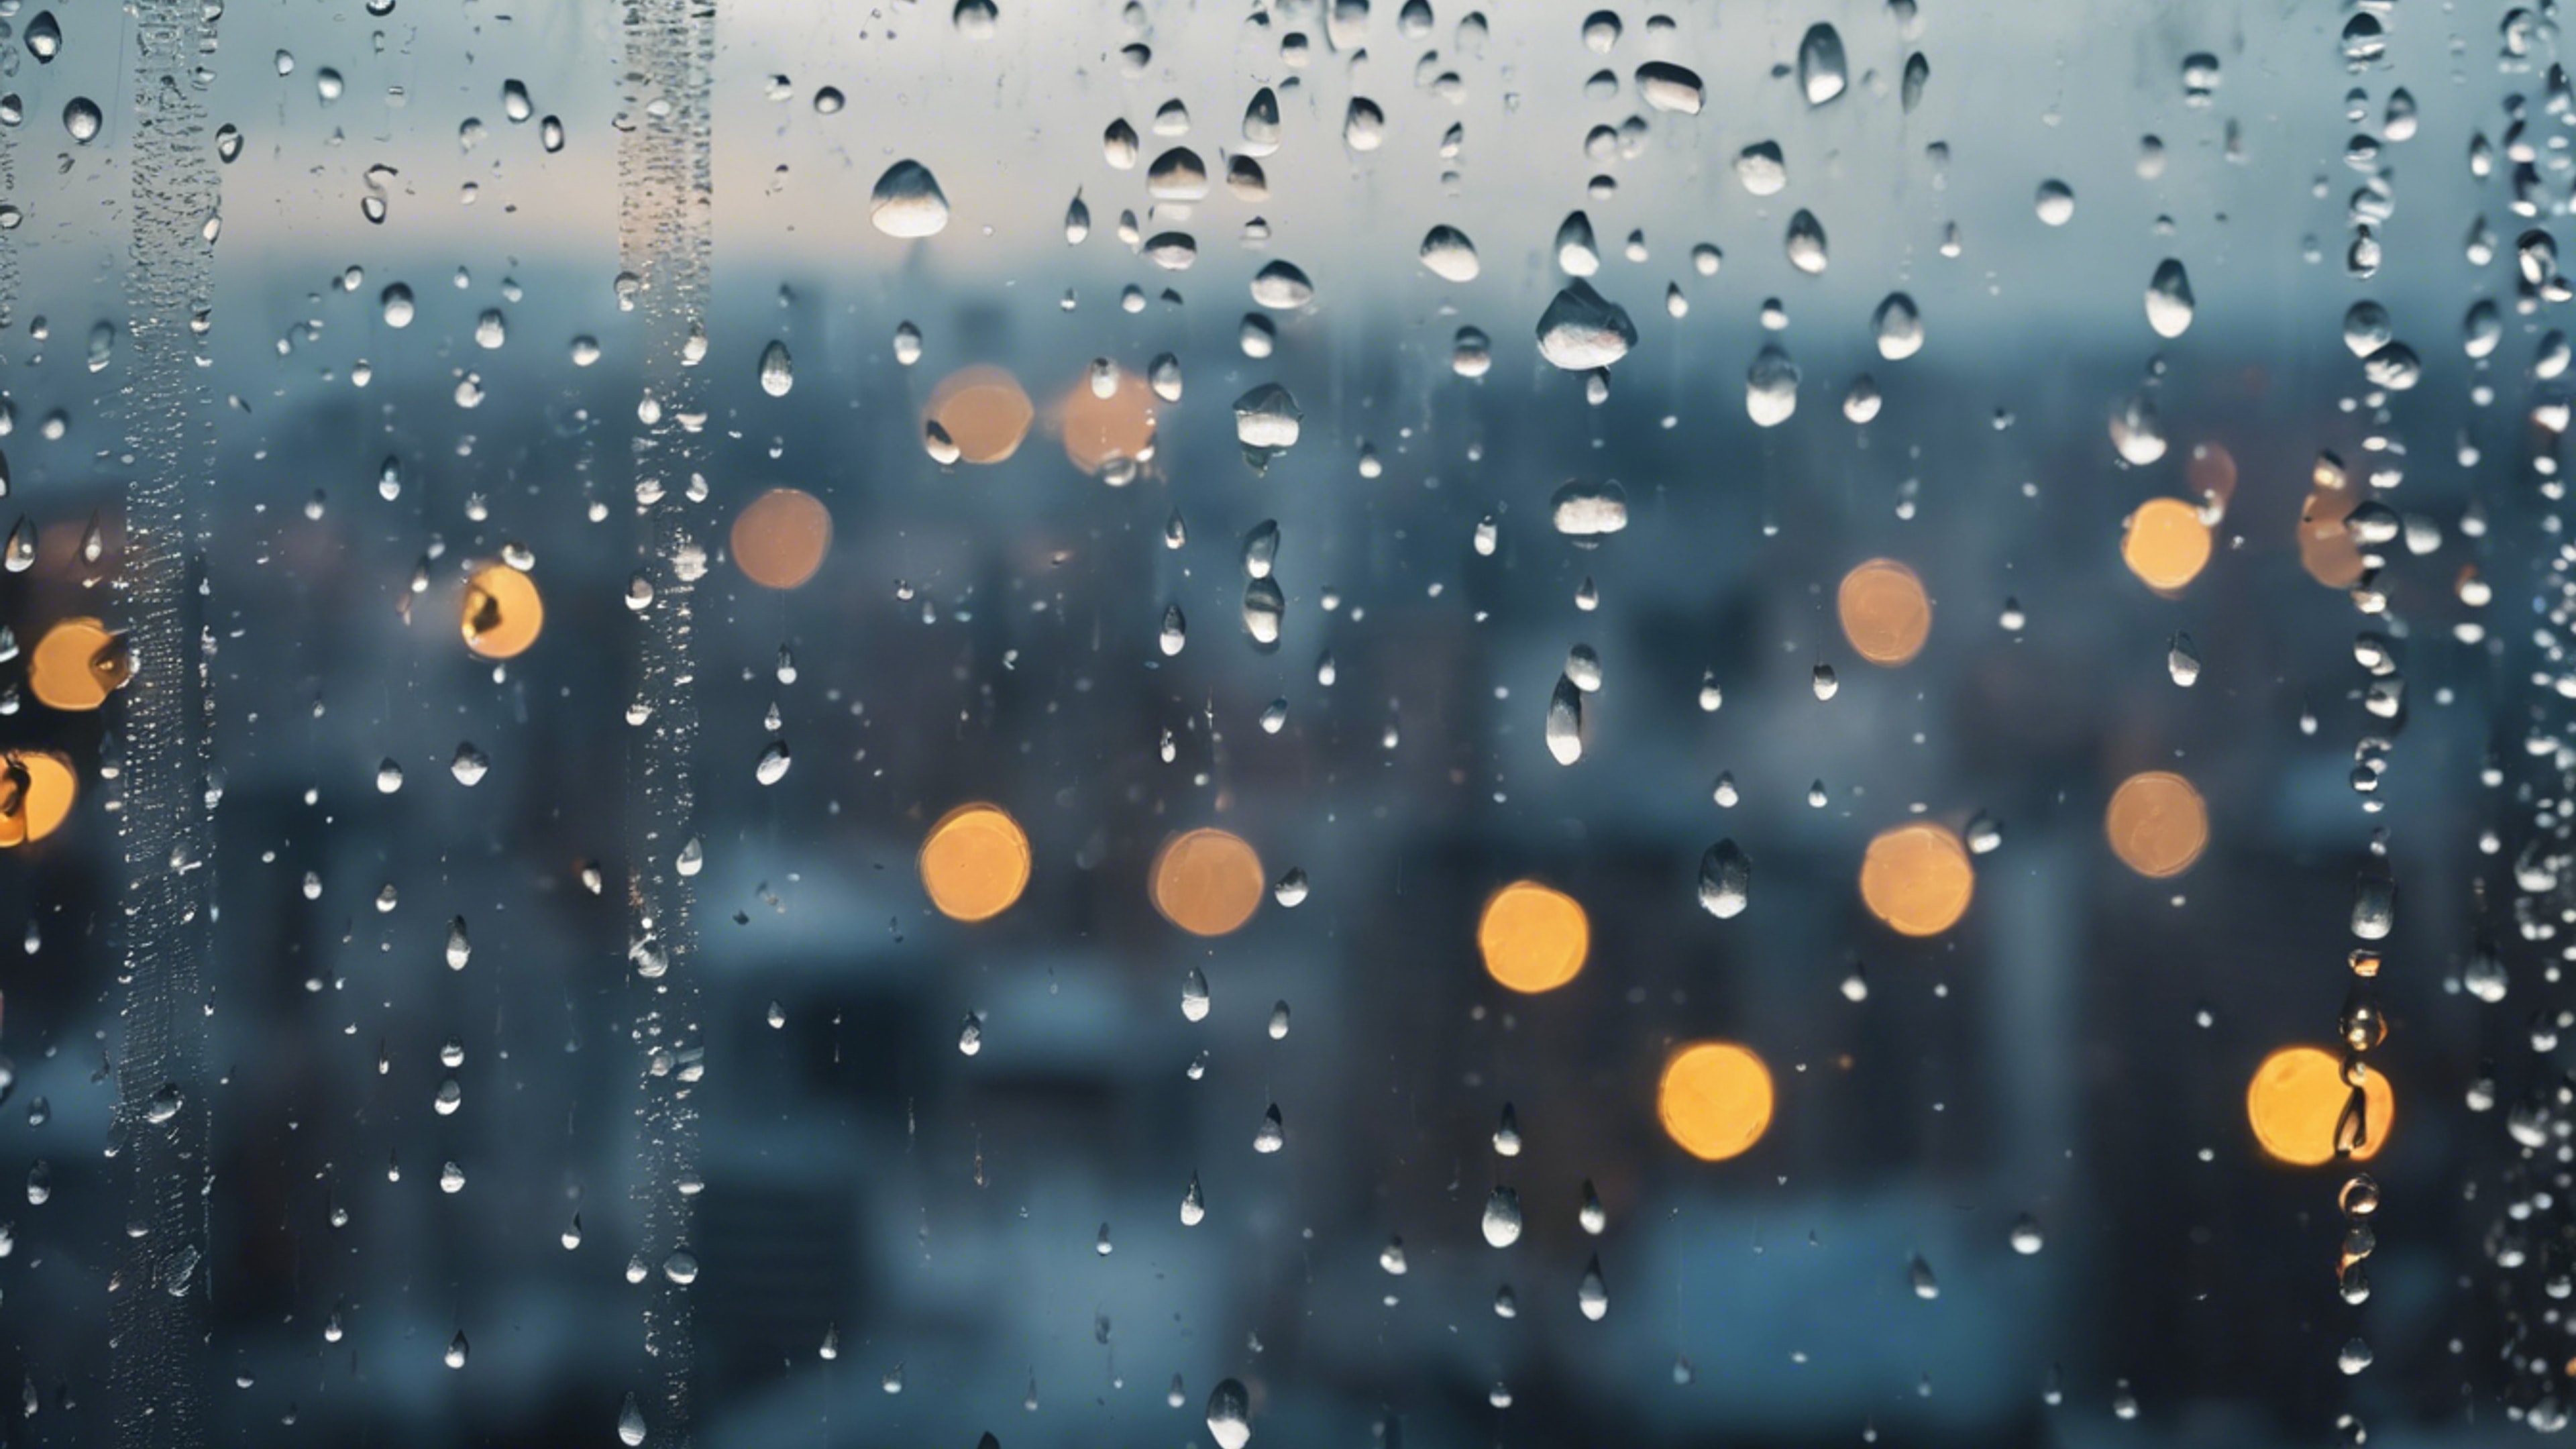 Close-up of raindrops streaming down a window pane, with a blurry cityscape in the background. Fond d'écran[d0f87e7319714e23a96f]